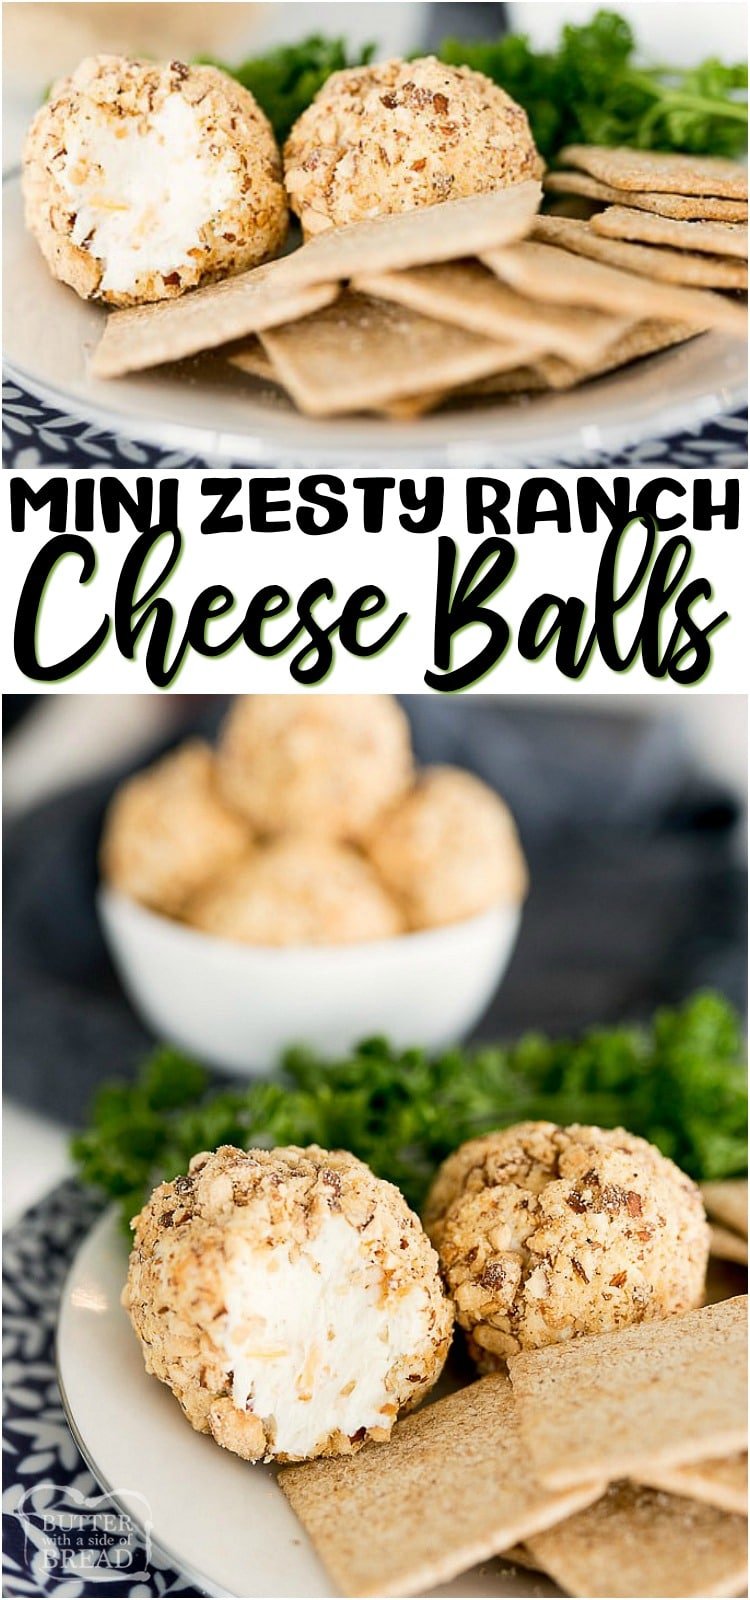 Mini Cheese Balls are everything you love about an ordinary Cheese Ball, only personal sized! The zesty ranch cream cheese ball recipe smeared on a crunchy cracker is the best appetizer around. #appetizer #cheeseballs #ranch #creamcheese #cheese #cheeseballrecipe from BUTTER WITH A SIDE OF BREAD